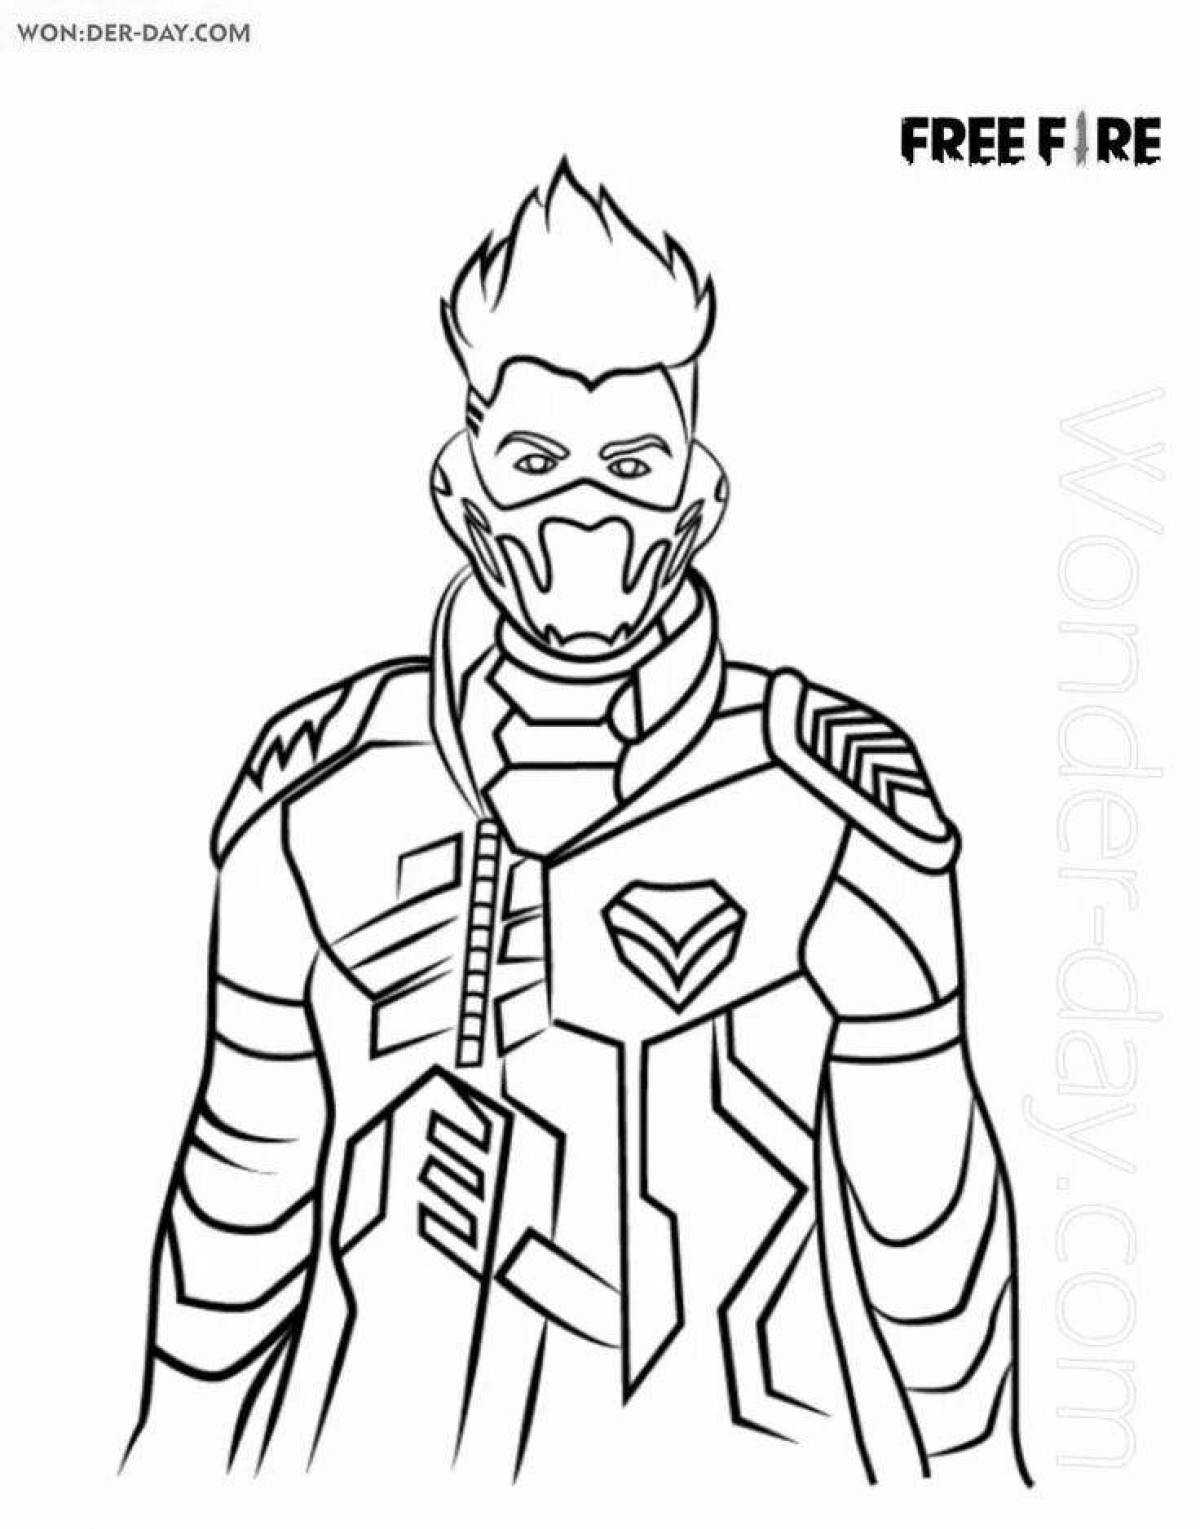 Colorful free fire coloring page